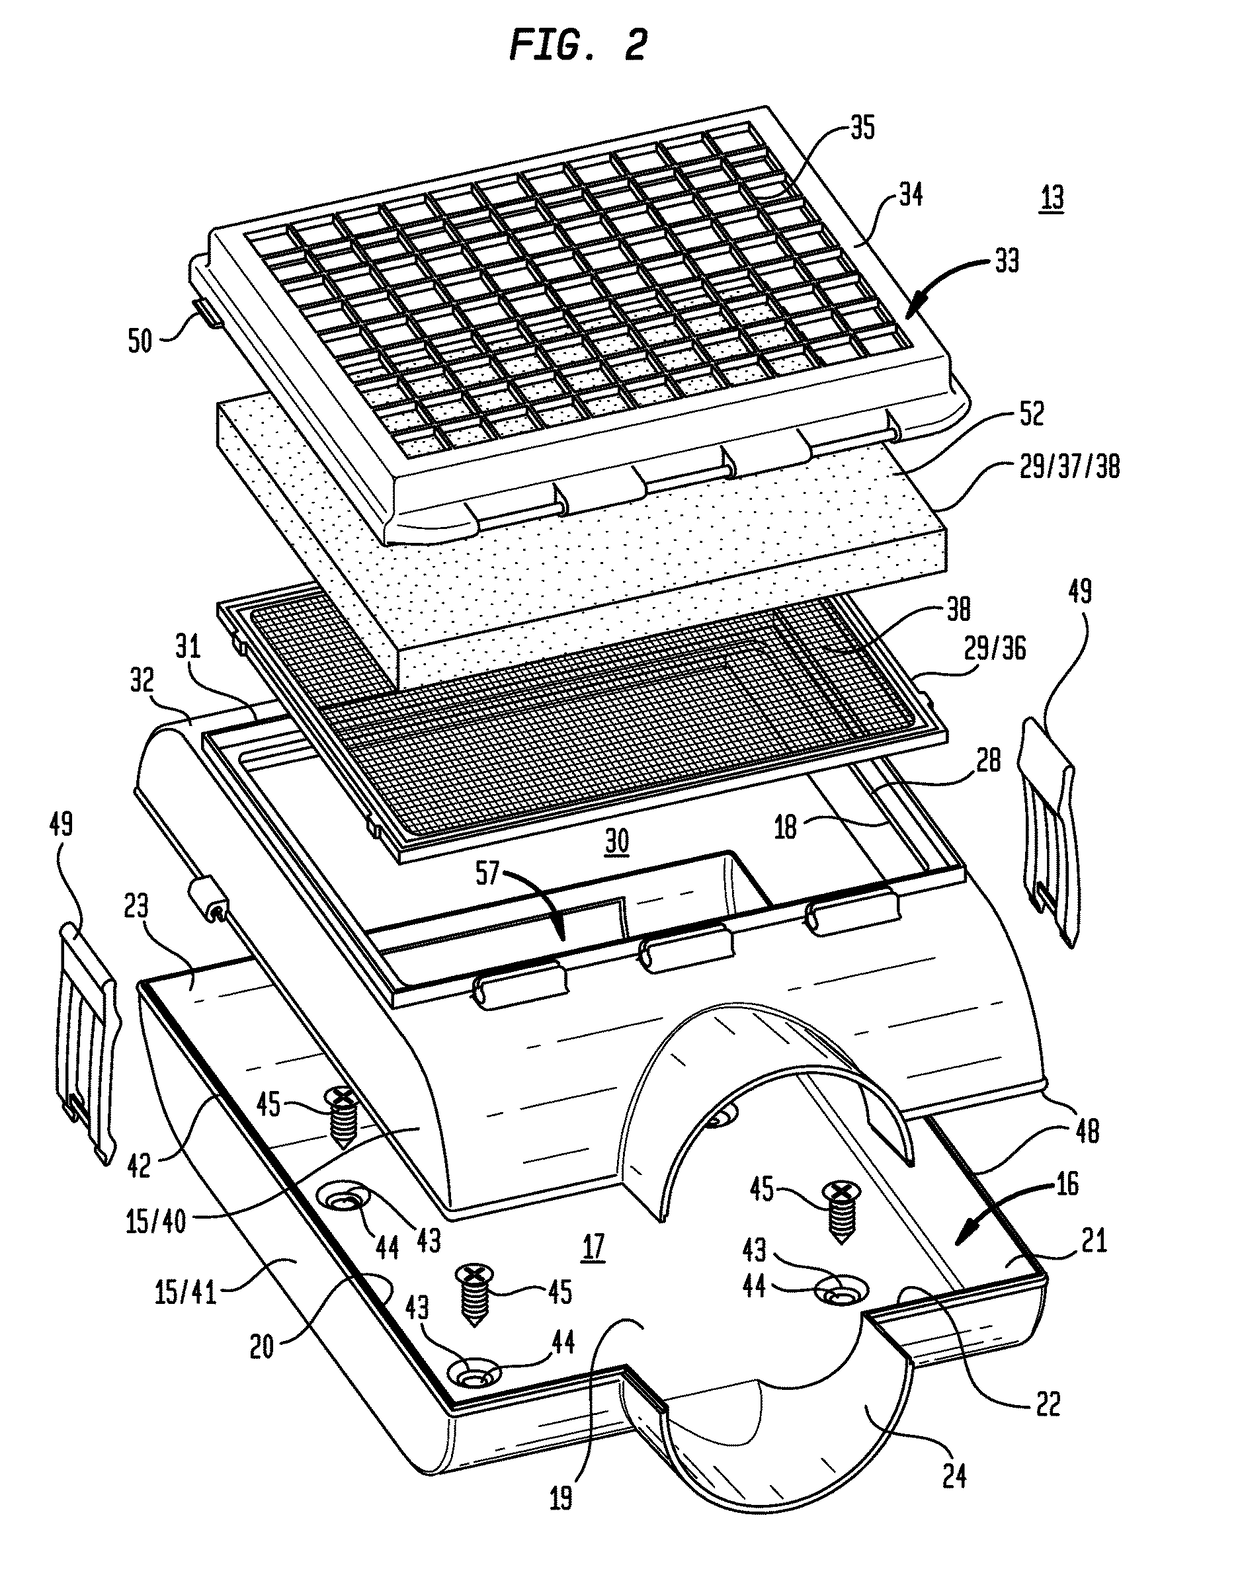 Lint catching system and exhaust assembly